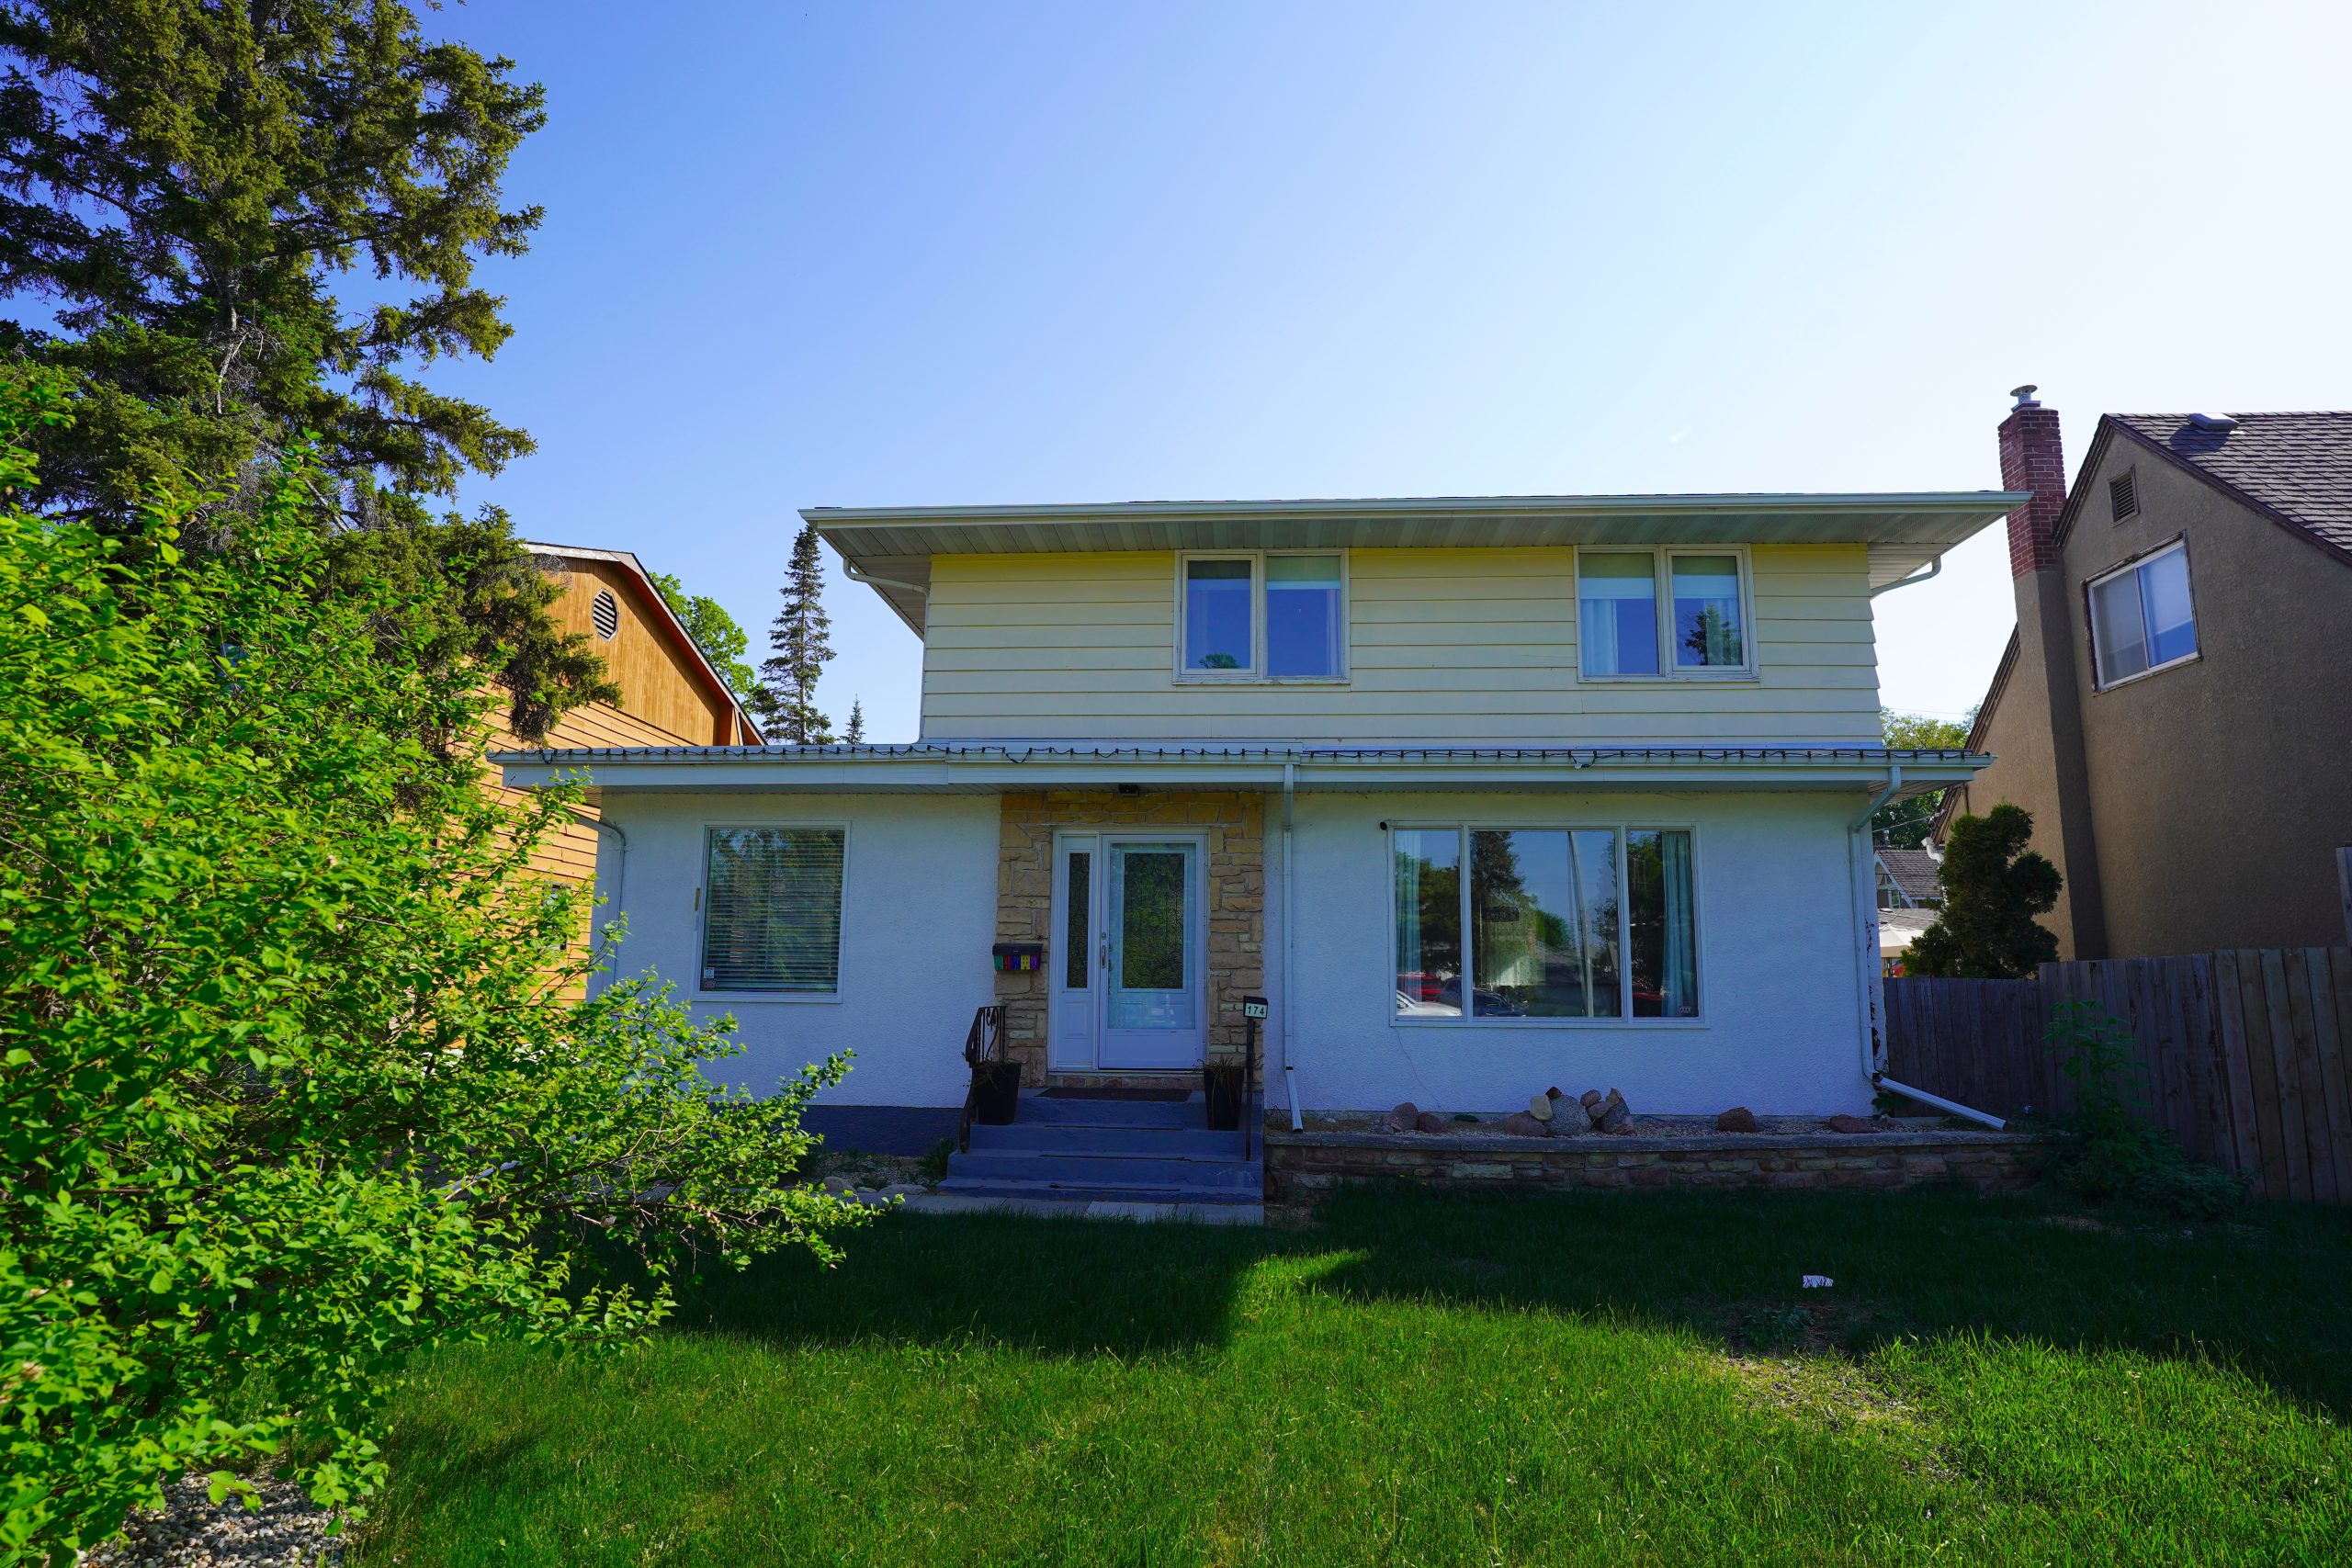 174 Mossdale Avenue – 3-Bedroom Family Home in Fraser’s Grove